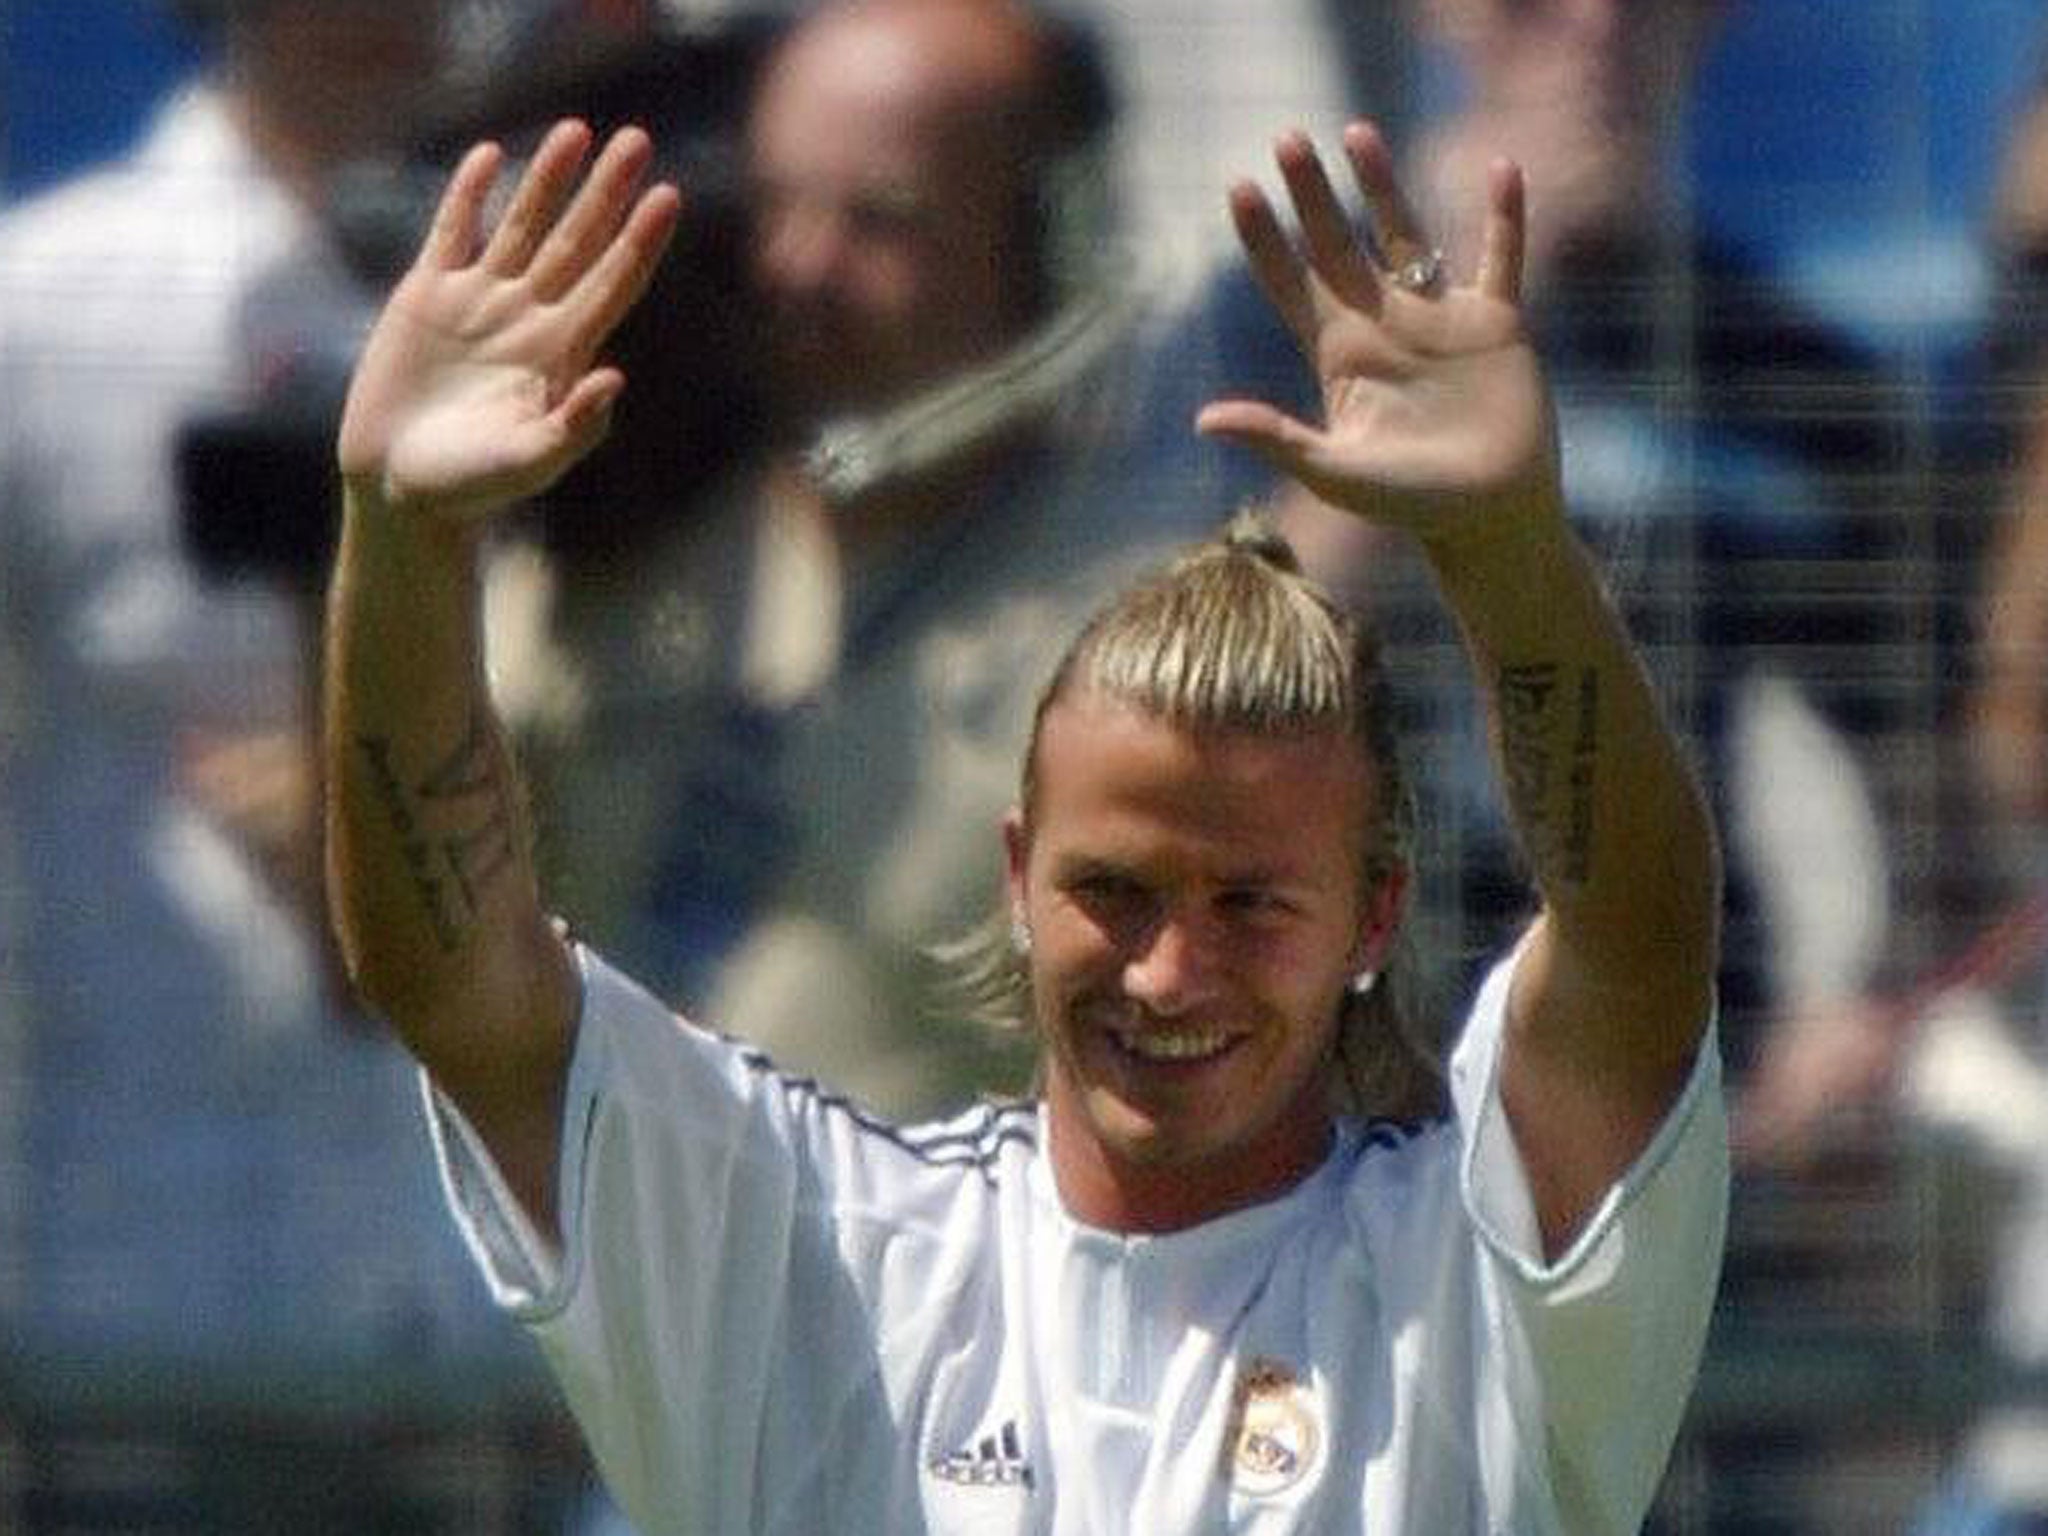 David Beckham could only manage a 'Hala Madrid' when he joined Real in 2003